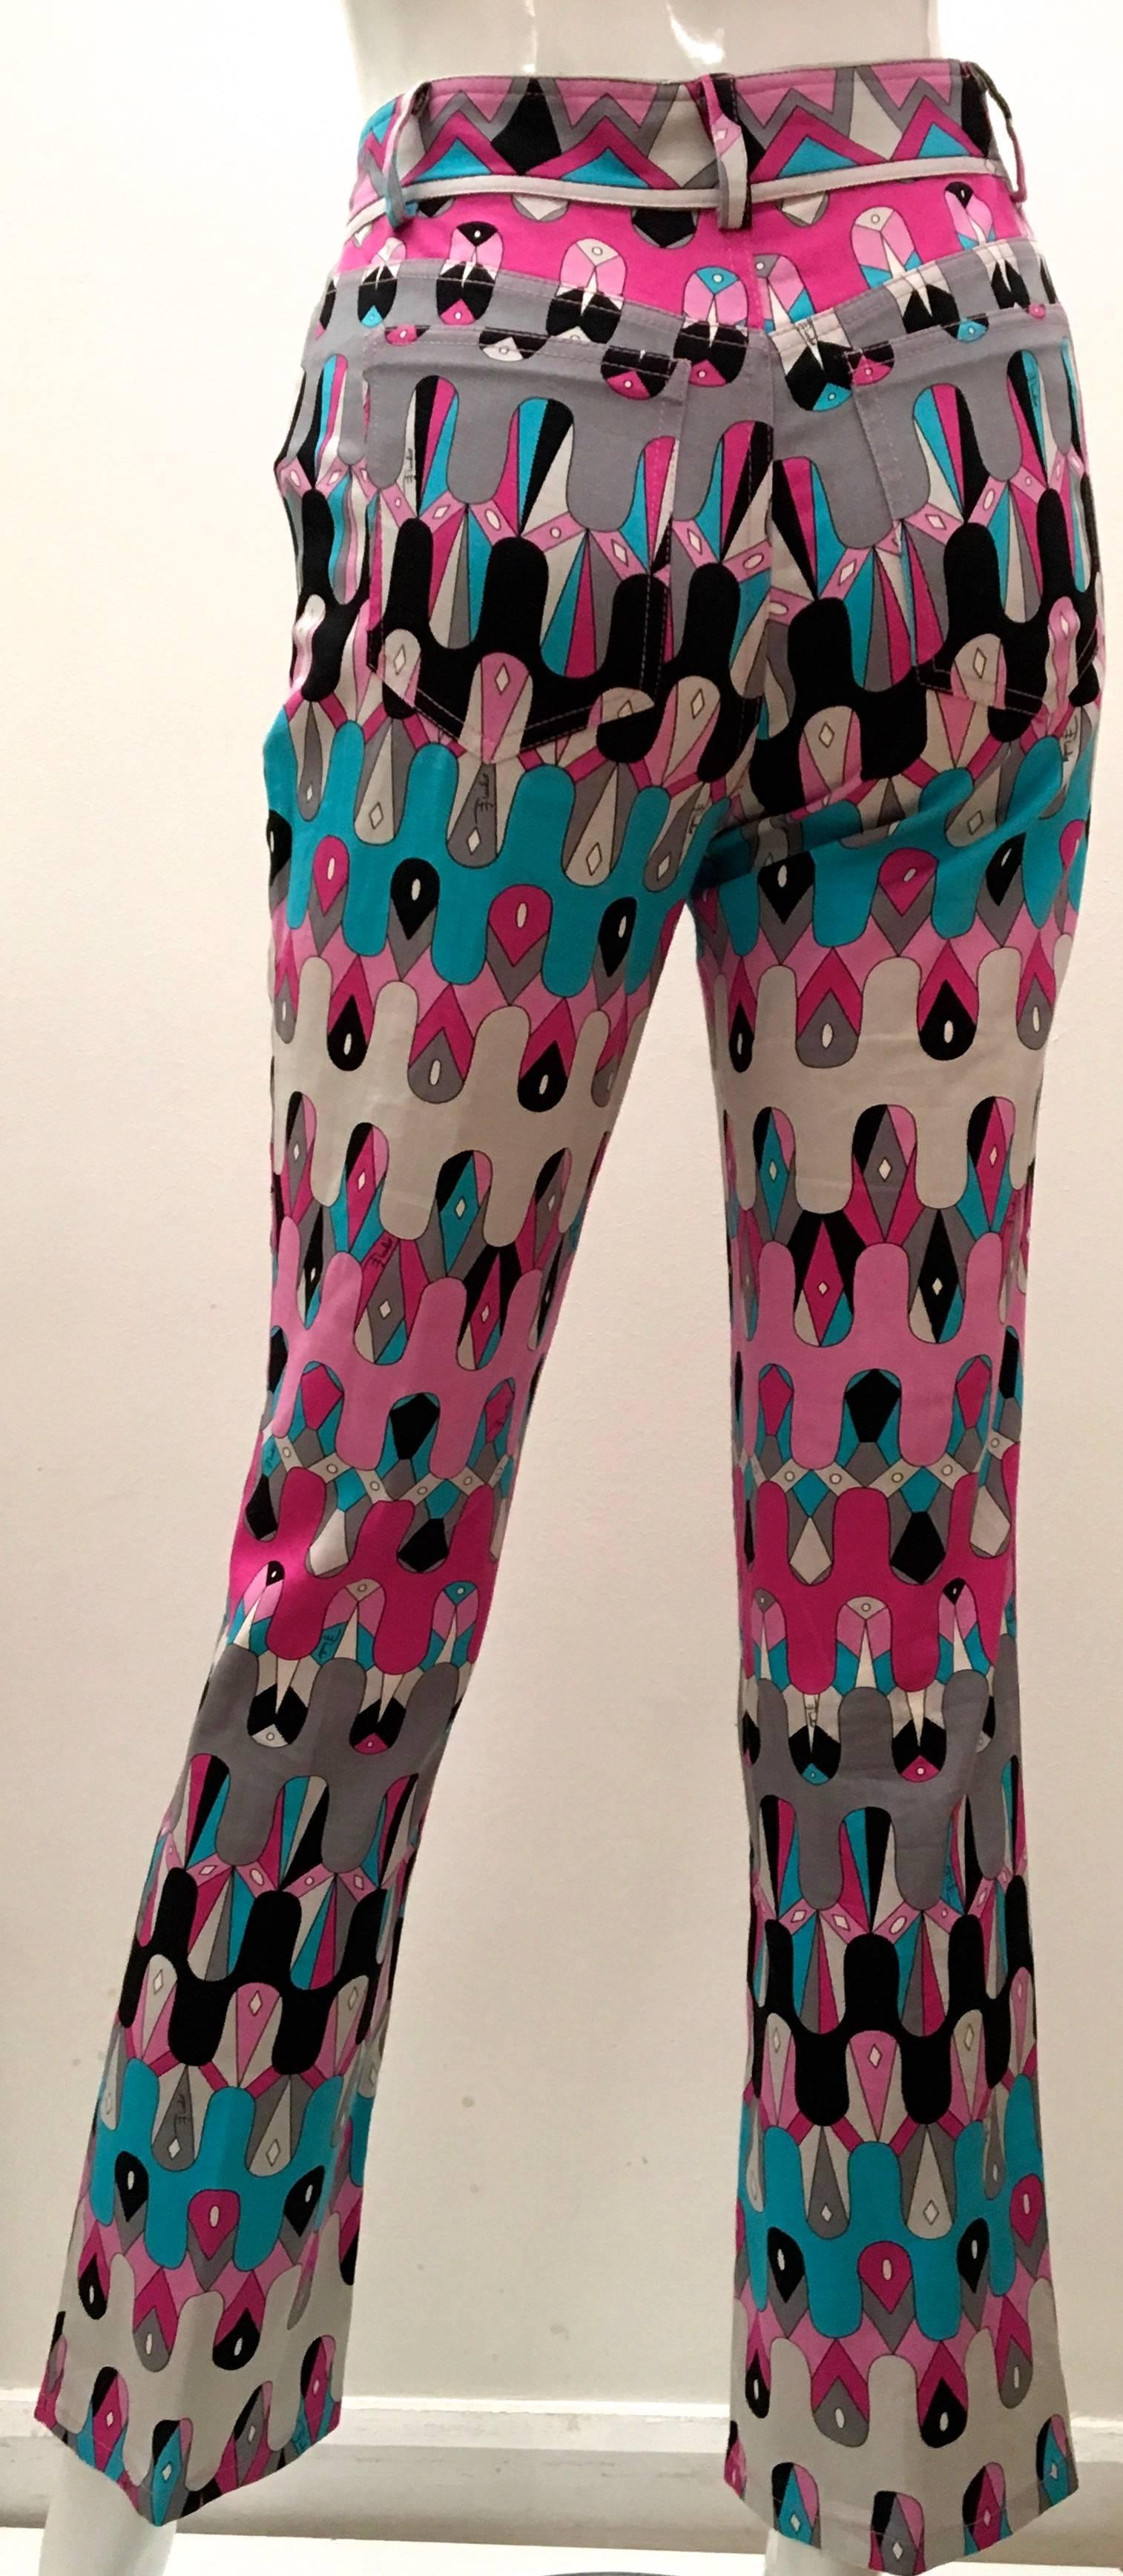 This fabulous pair of cotton Emilio Pucci vintage pants have a wonderful vibrant color and have not lost their dynamic coloring over the years. The pants are very small, so please pay close attention to the measurements. It is a geometric pattern of